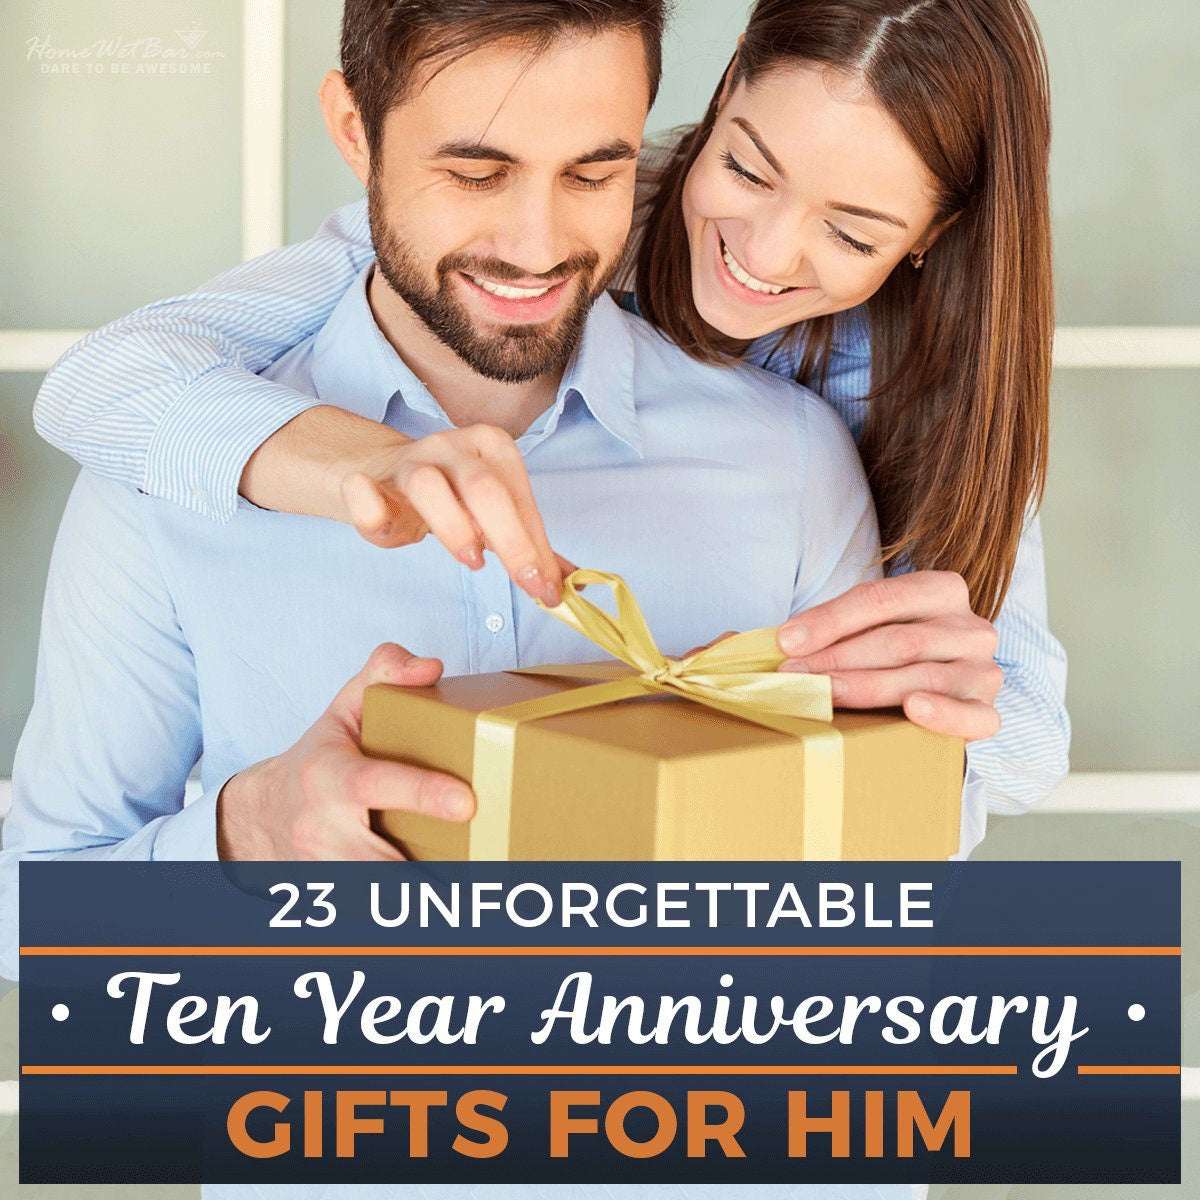 50th wedding anniversary gifts for him